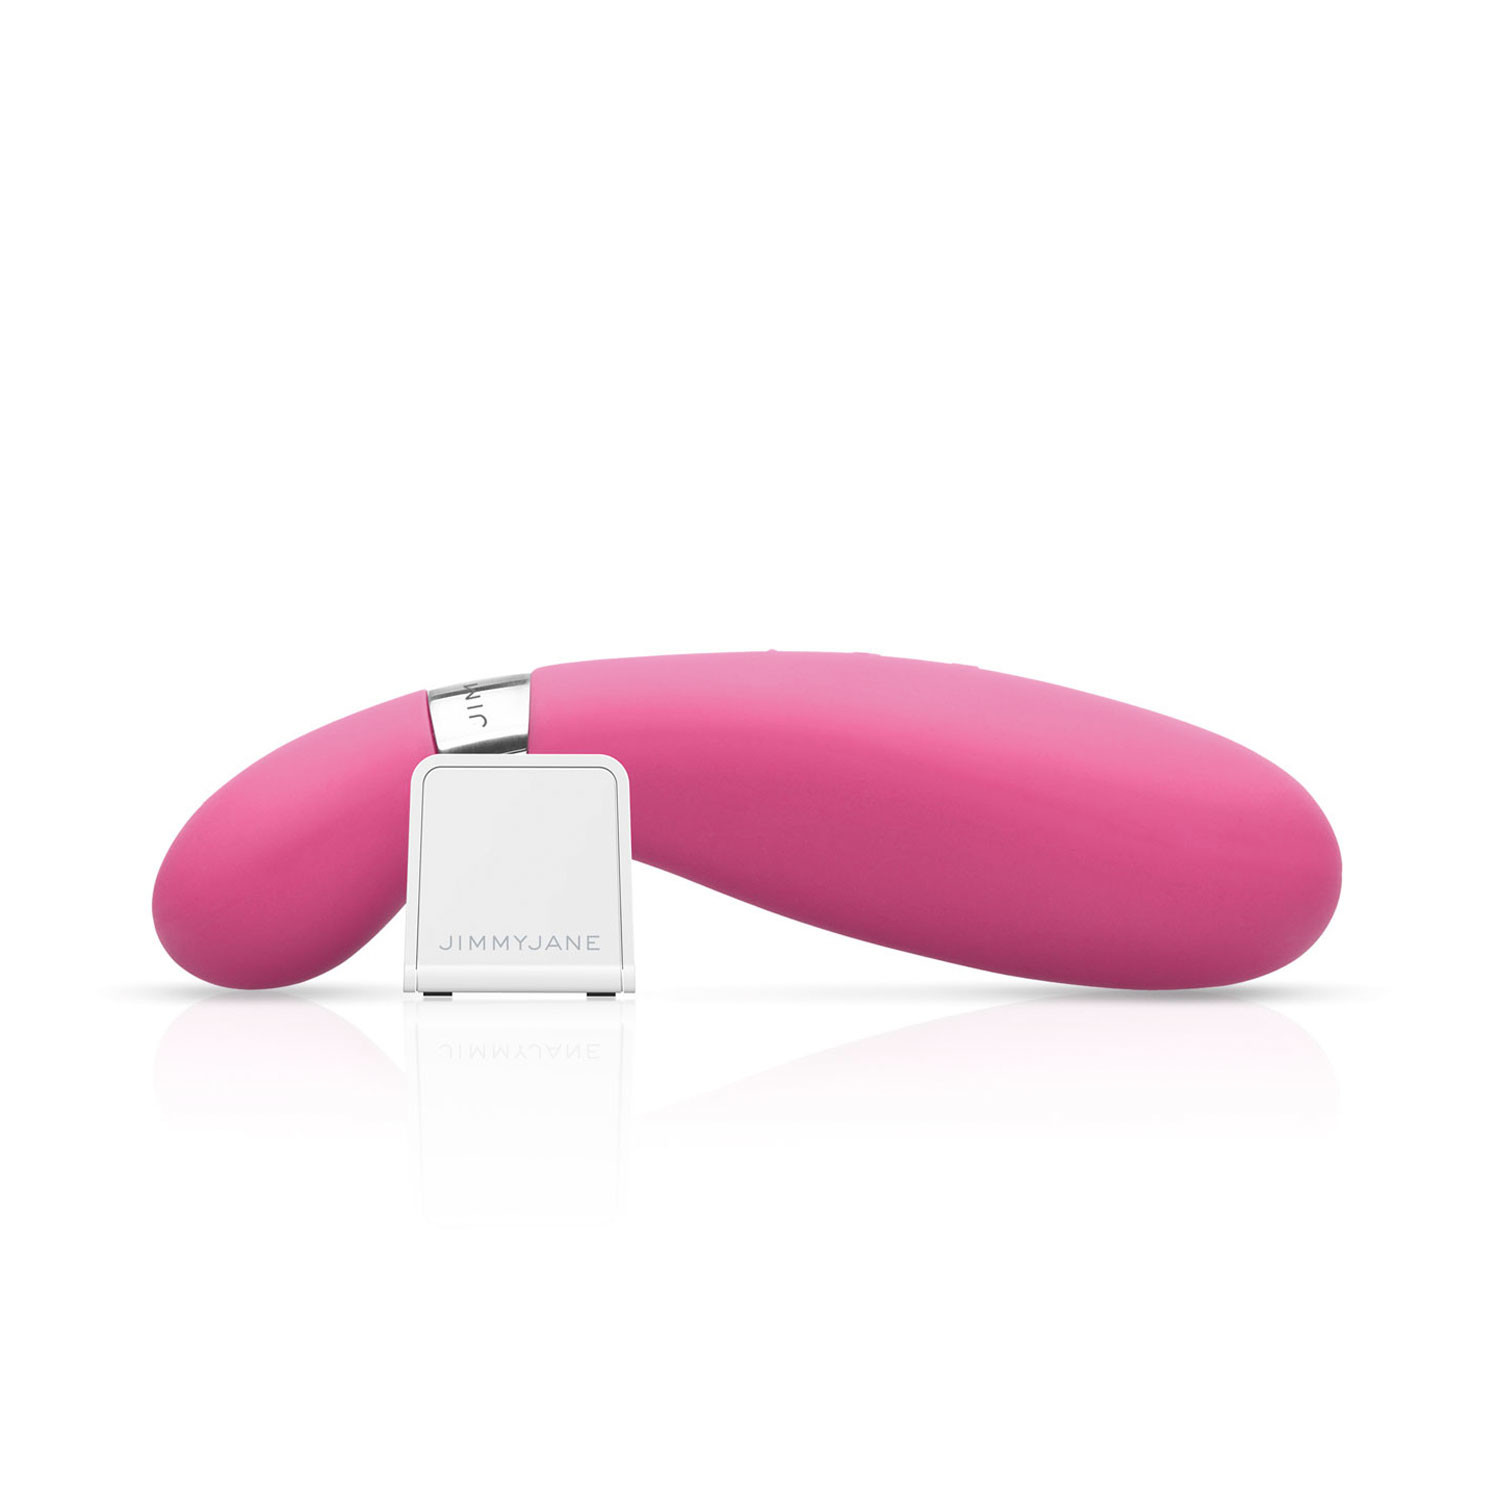 Form 6 Waterproof Rechargeable Vibrator Pink Jimmyjane Touch